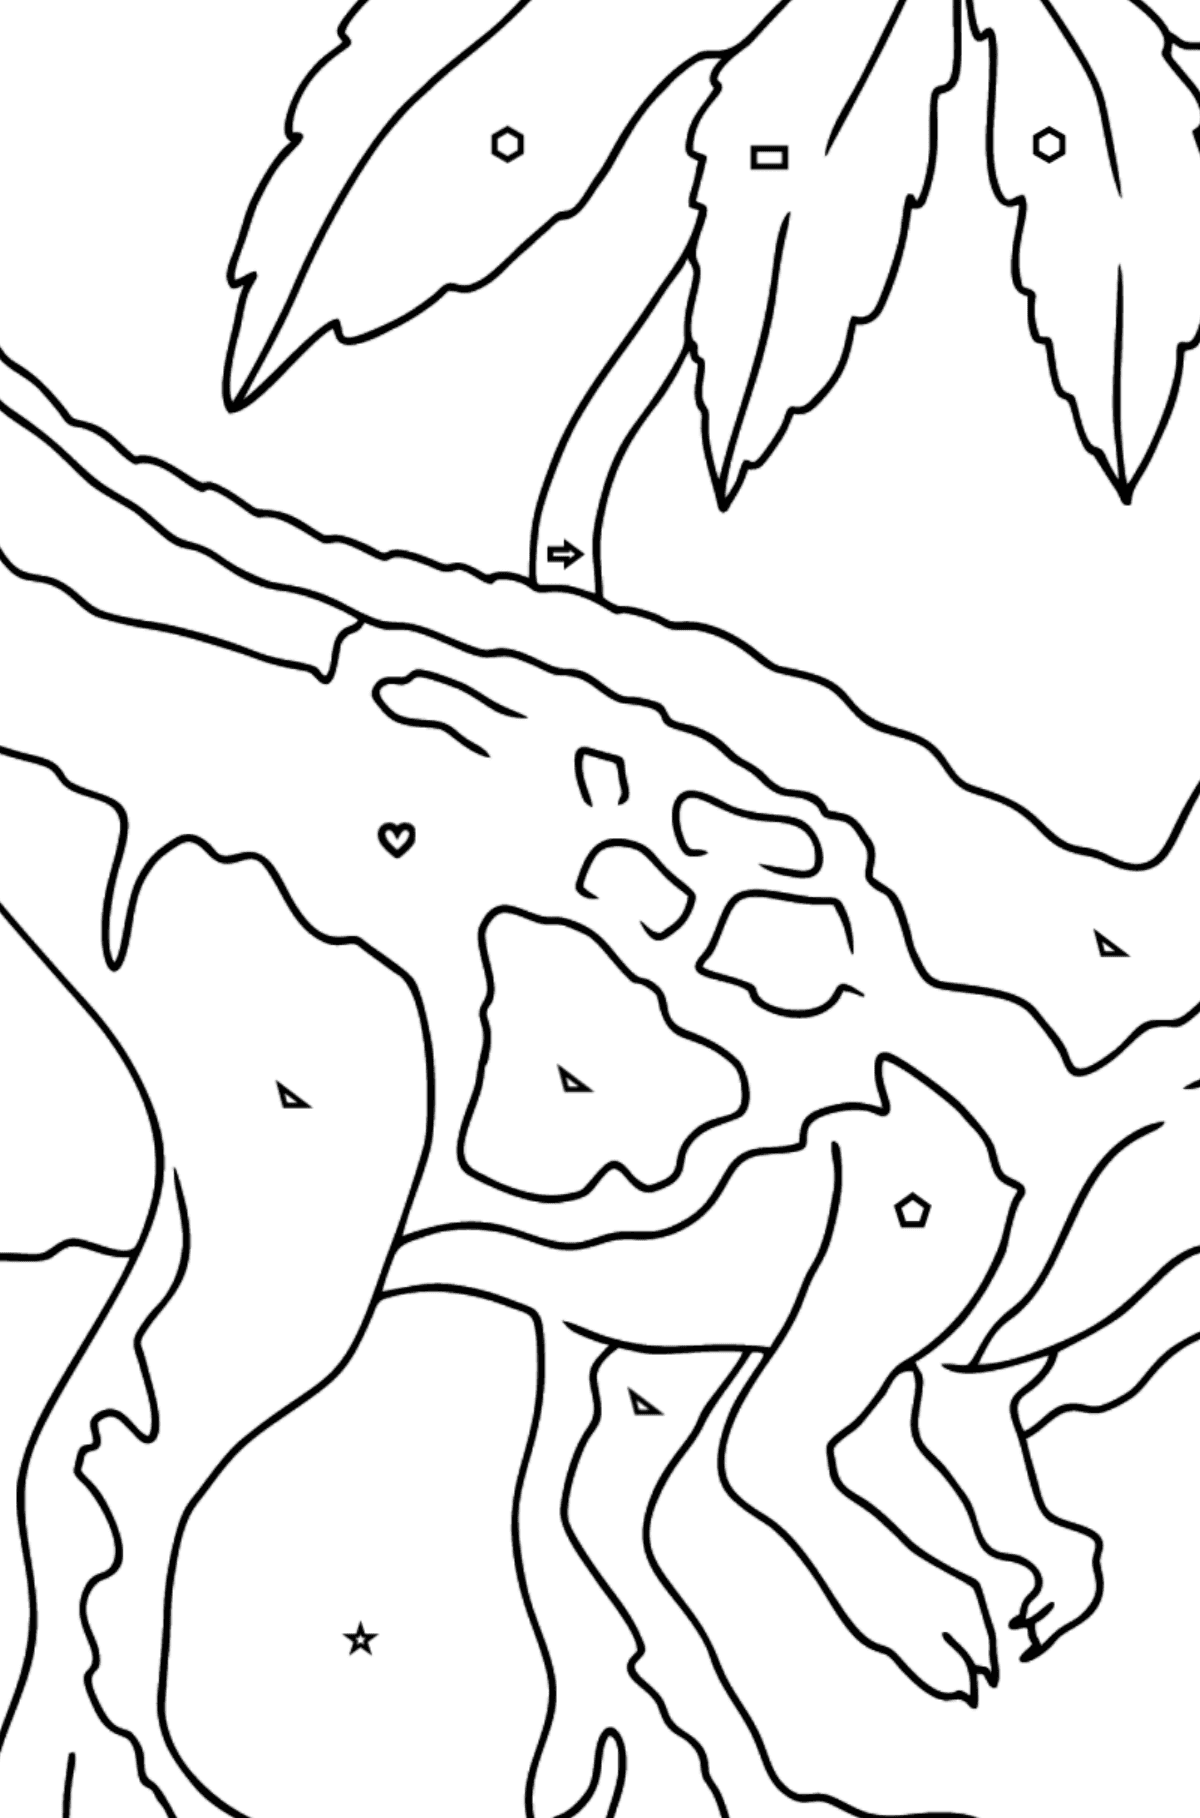 Coloring Page - Tyrannosaurus - A Terrestrial Predator - Coloring by Geometric Shapes for Kids